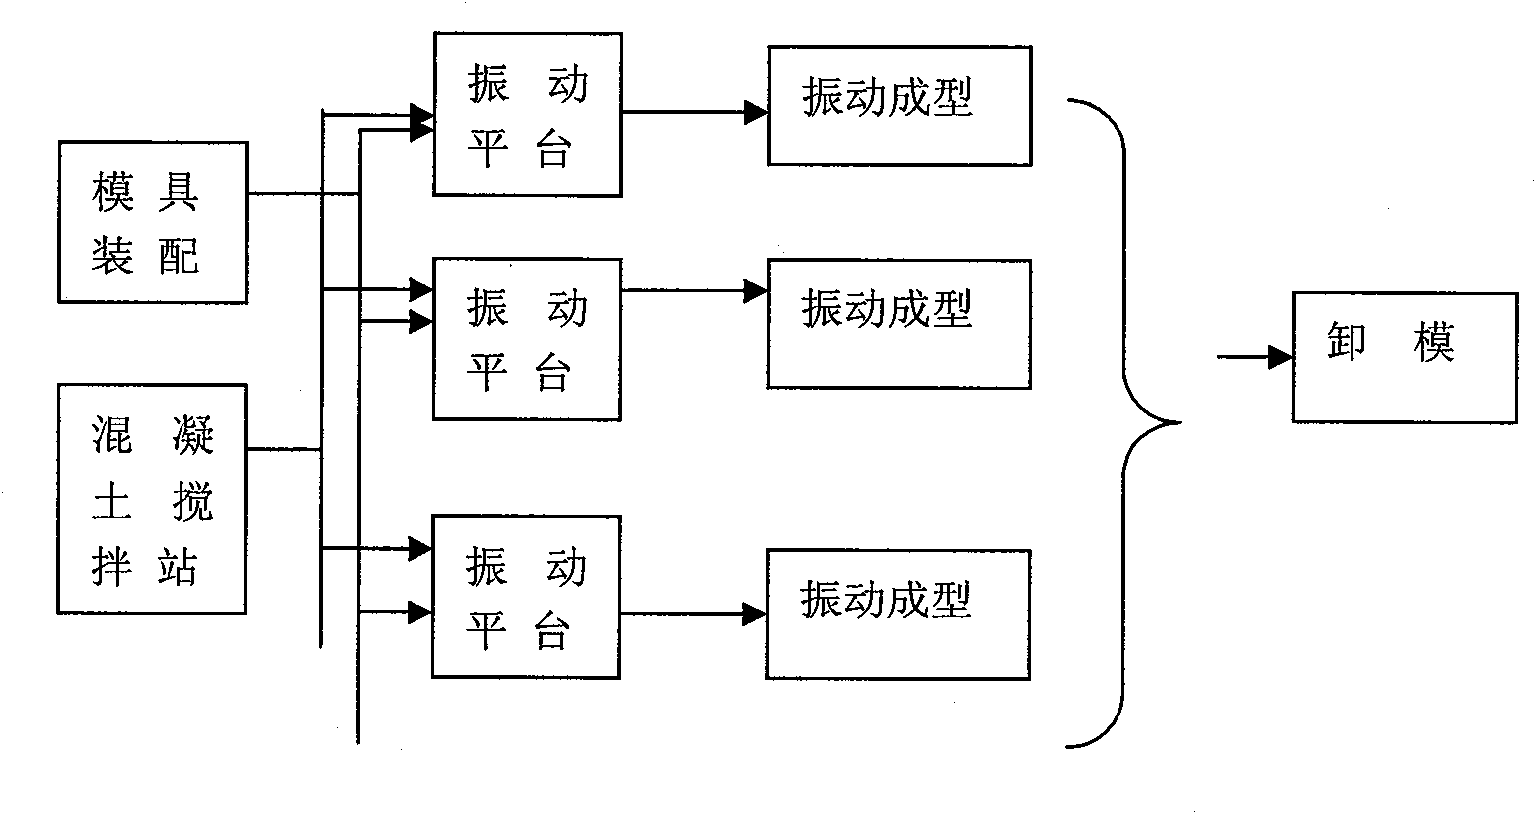 Concrete pipe platform vibration moulding process and device thereof